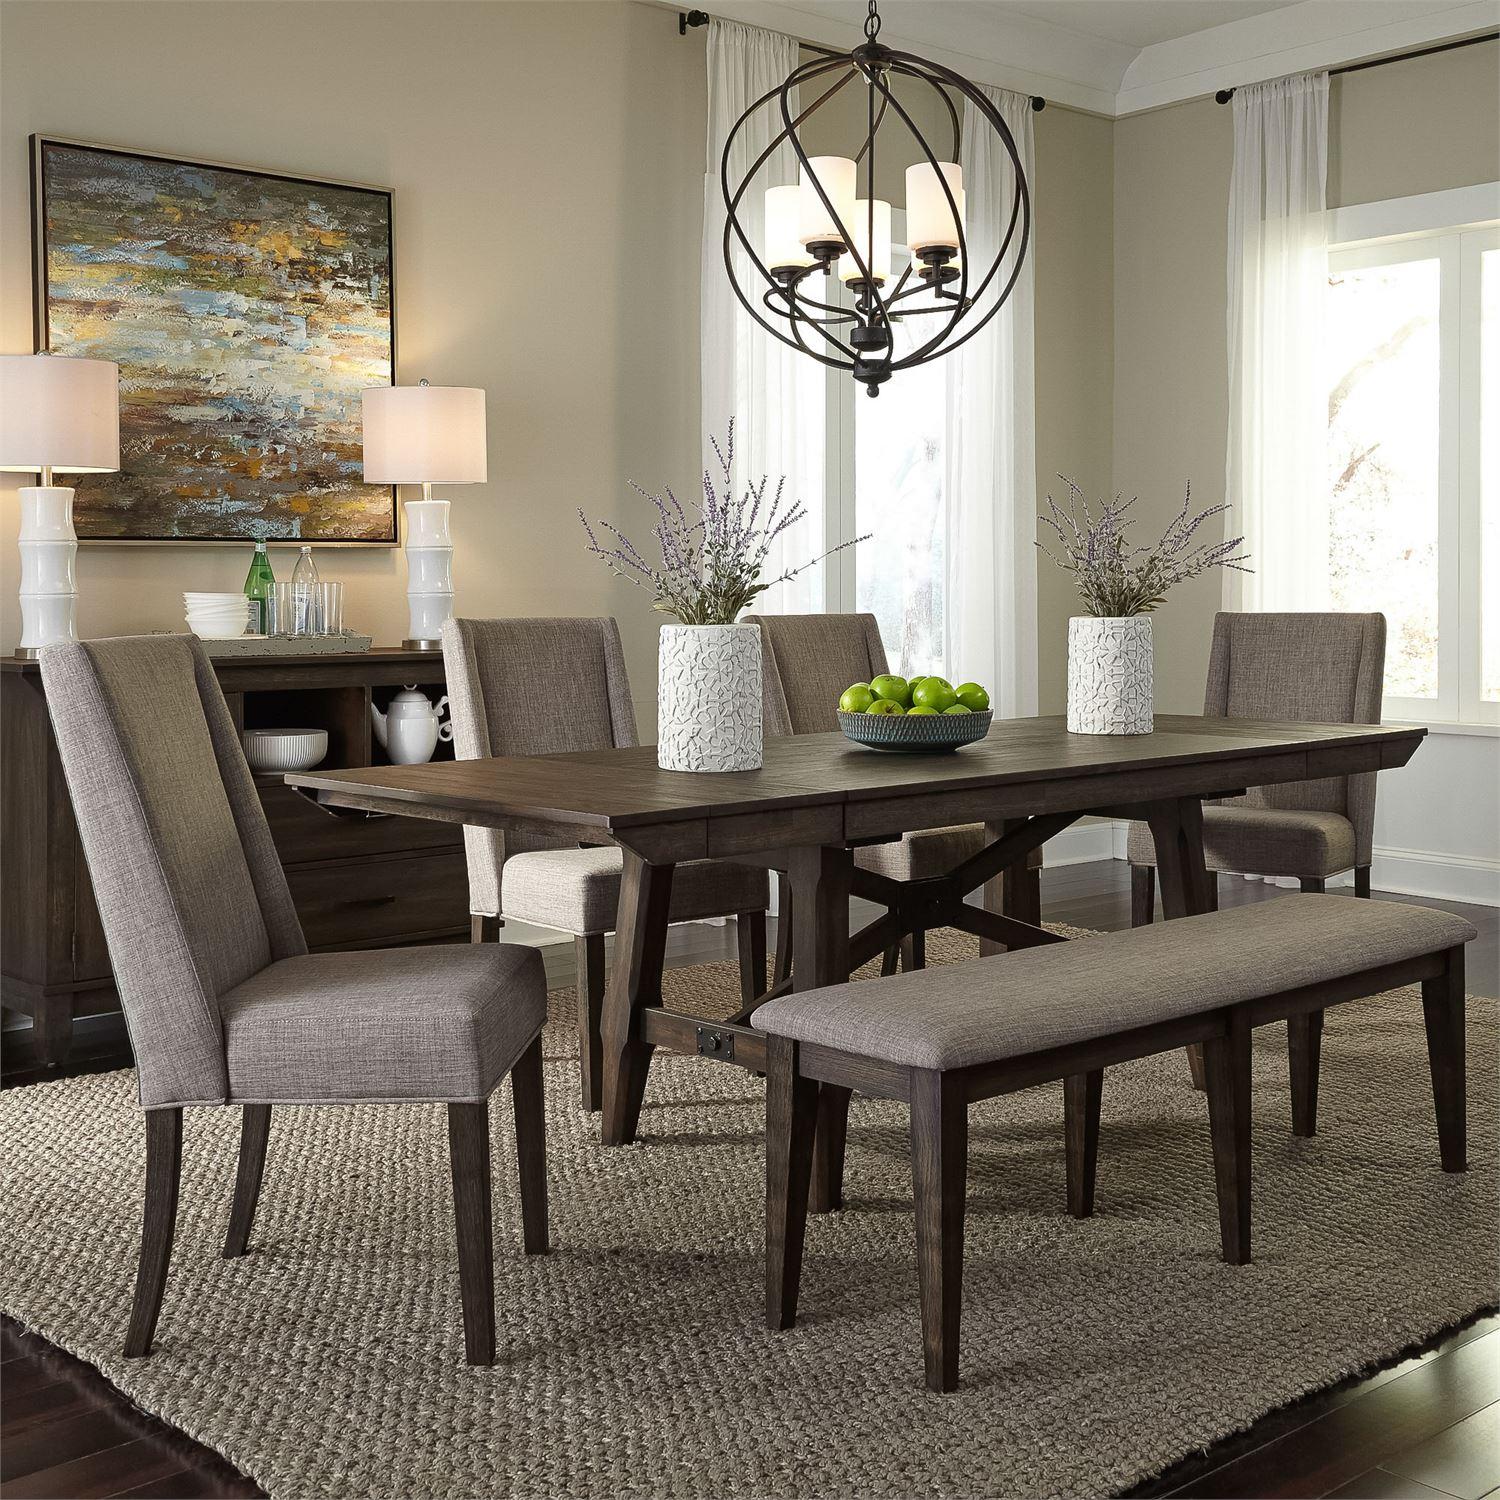 Rustic Dining Room Set Double Bridge  (152-CD) Dining Room Set 152-CD-O6TRS in Chestnut, Gray Fabric